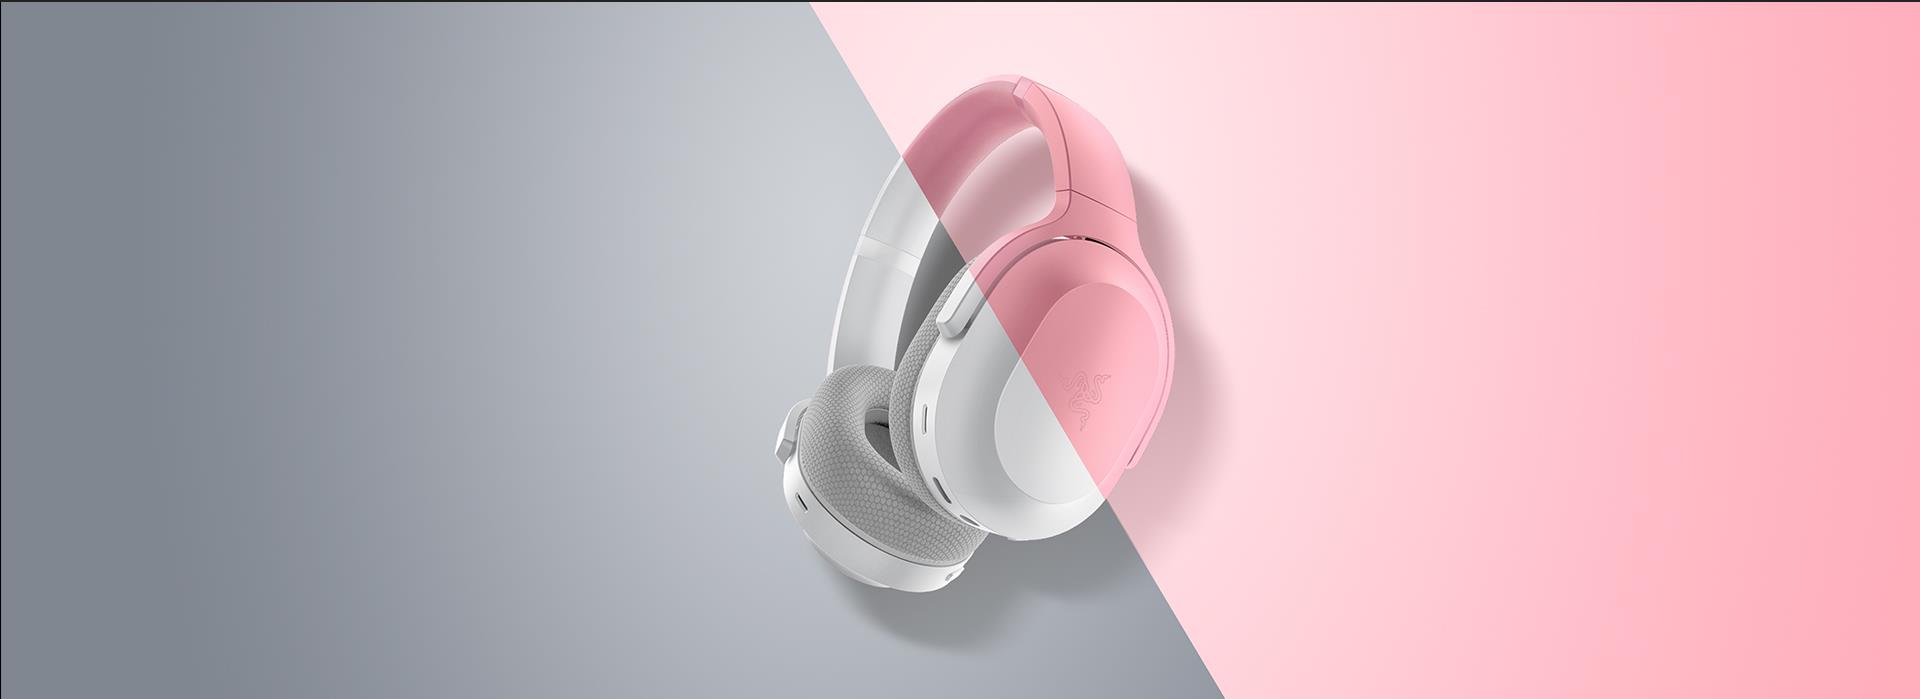 A large marketing image providing additional information about the product Razer Barracuda - Wireless Multi-platform Gaming Headset (Quartz Pink) - Additional alt info not provided